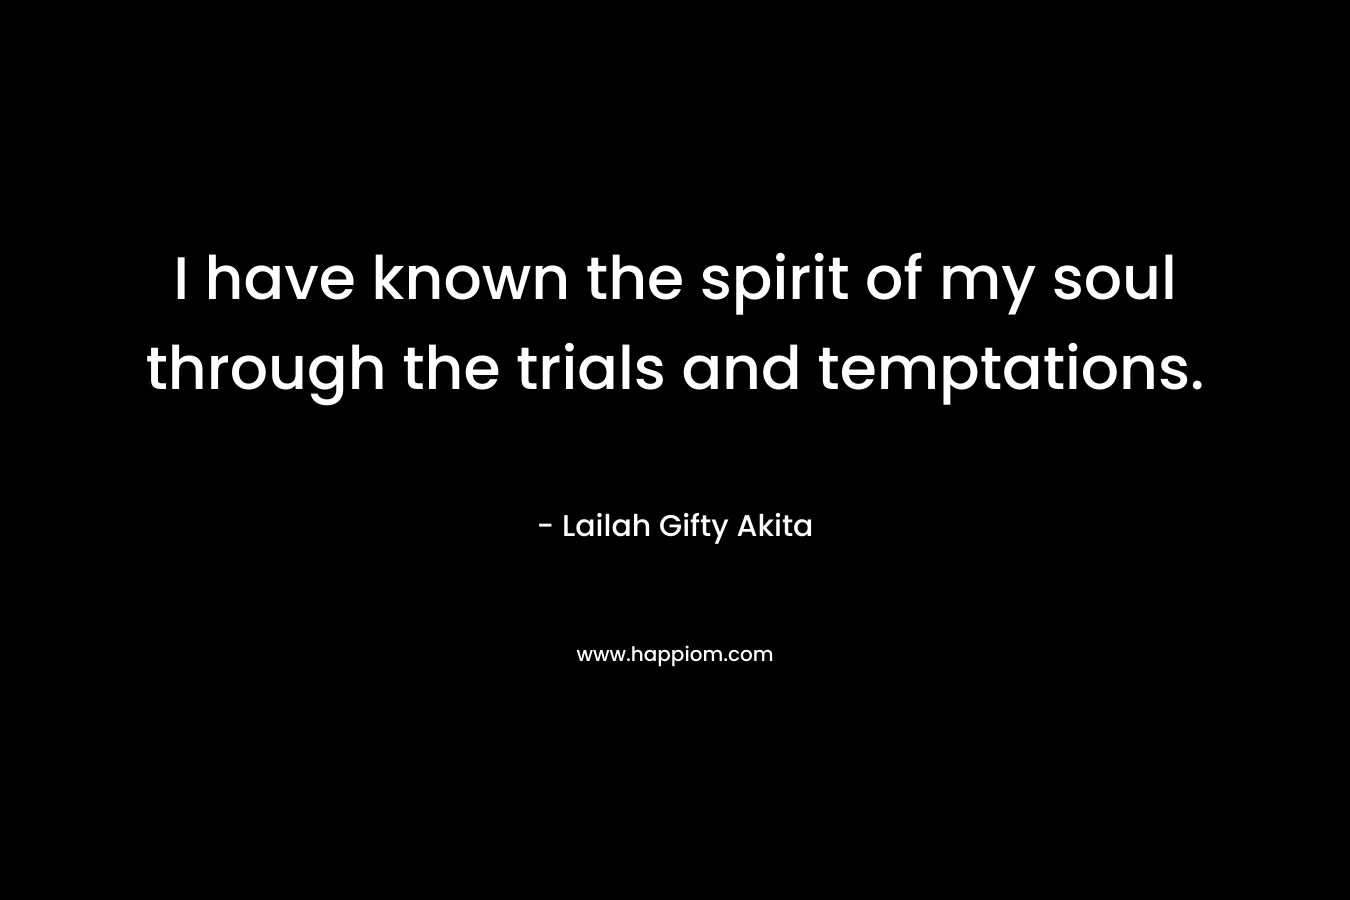 I have known the spirit of my soul through the trials and temptations.